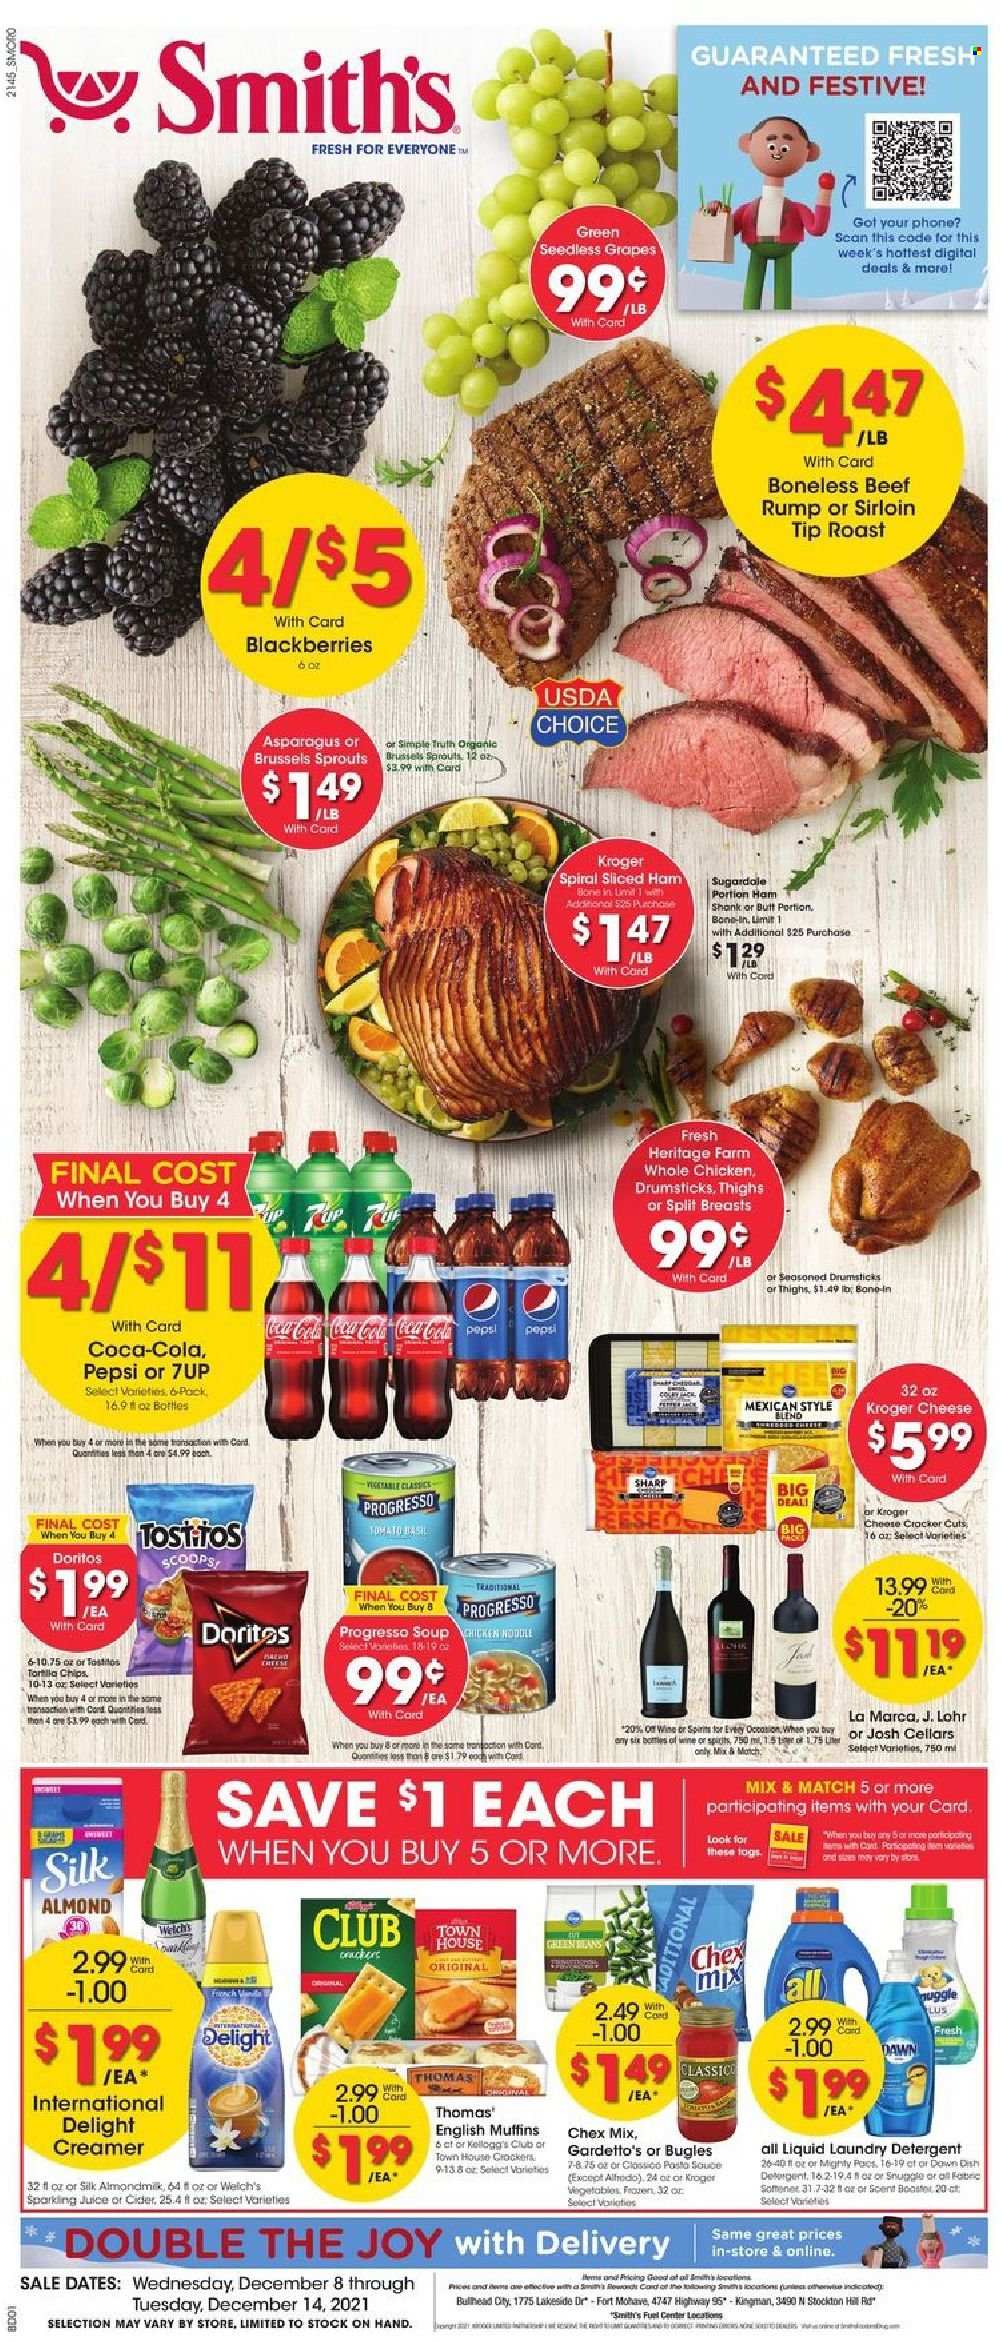 thumbnail - Smith's Flyer - 12/08/2021 - 12/14/2021 - Sales products - seedless grapes, english muffins, asparagus, brussel sprouts, grapes, Welch's, pasta sauce, sauce, Progresso, ham, ham shank, almond milk, creamer, Kellogg's, Doritos, chips, Smith's, Tostitos, Chex Mix, esponja, Classico, Coca-Cola, Pepsi, juice, 7UP, sparkling juice, cider, whole chicken, detergent, laundry detergent. Page 1.